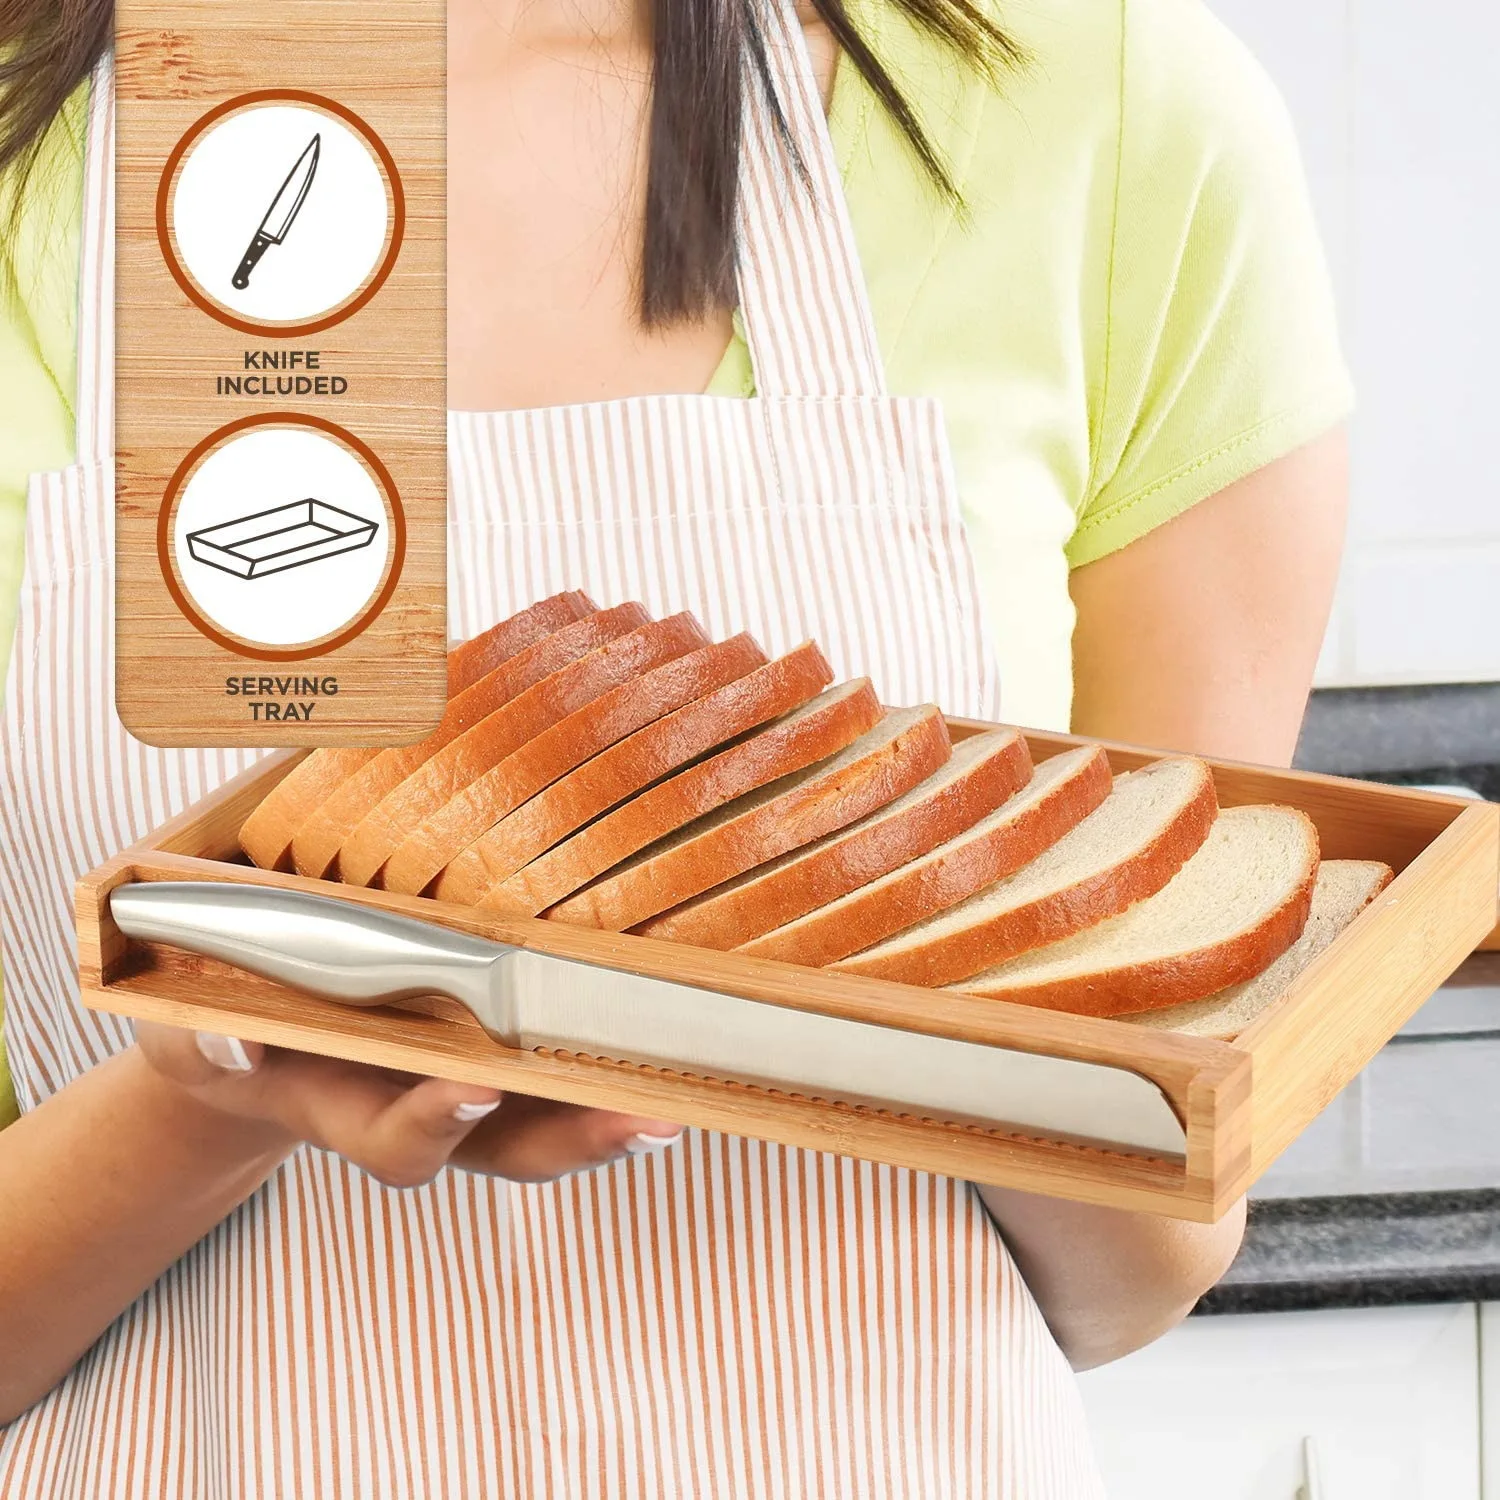 2021 NEW Bamboo bread slicer foldable cutting board with knife set, baking supplies